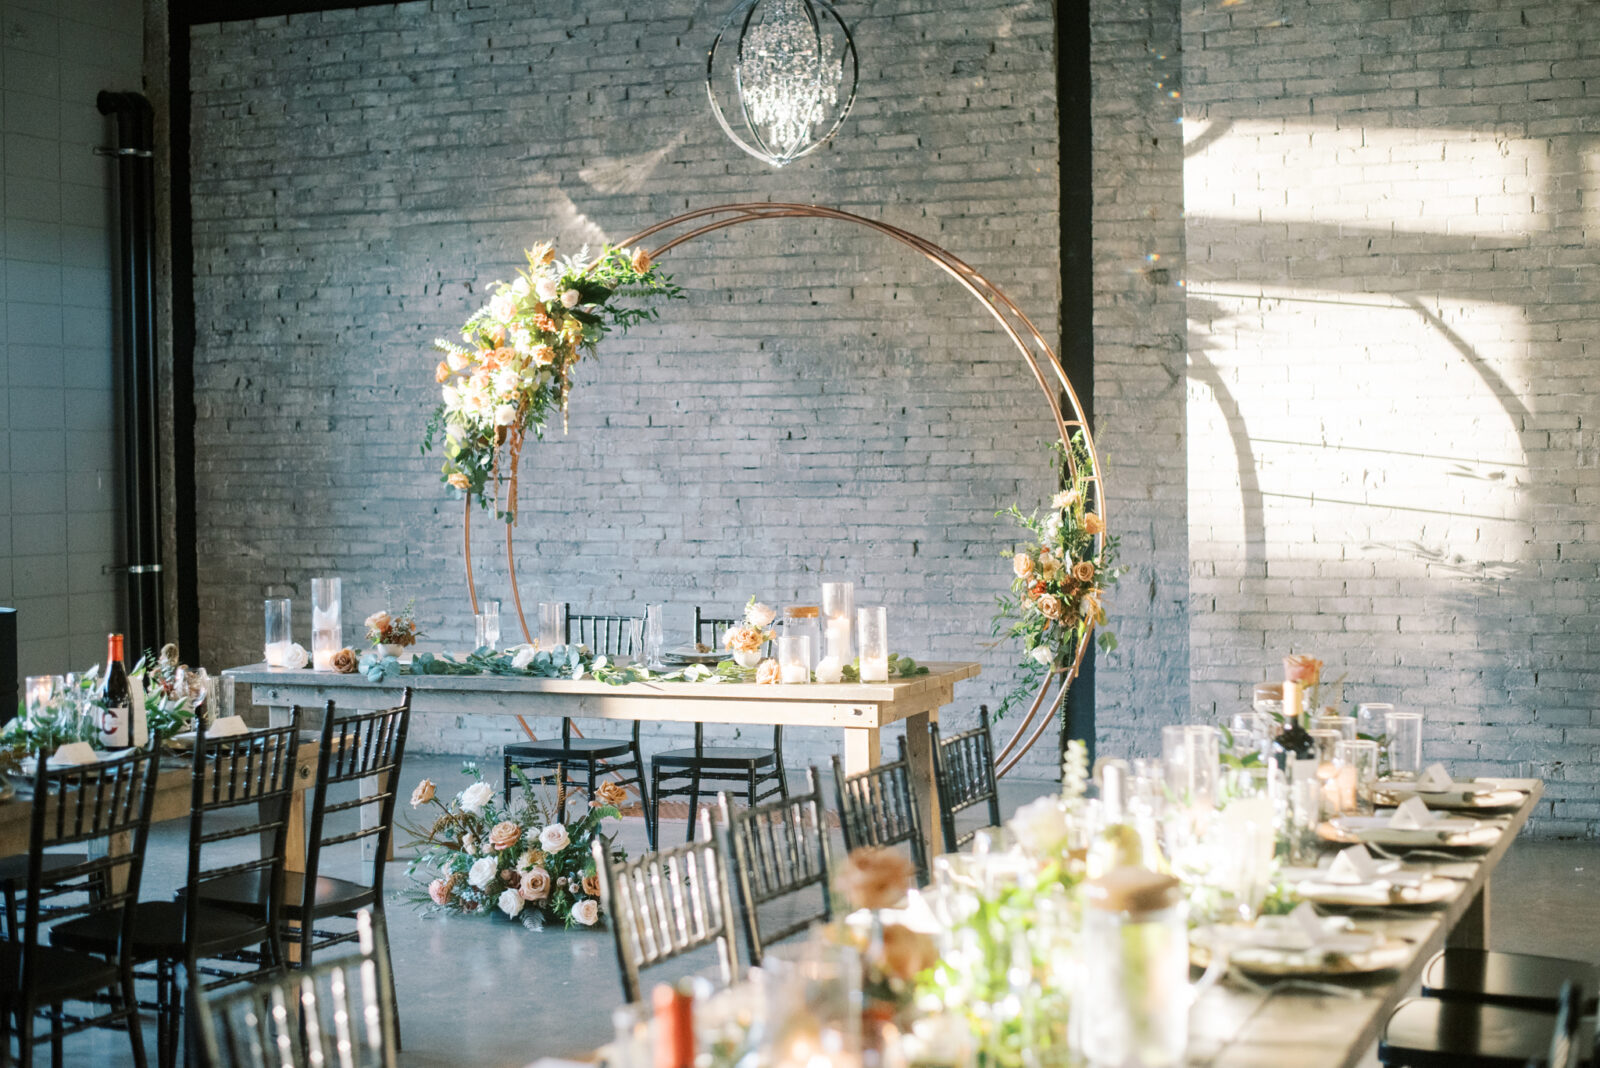 Golden hour photos of wedding reception in industrial venue in Edmonton, Alberta, gold arch back drop behind sweetheart table with pockets of fall-toned florals